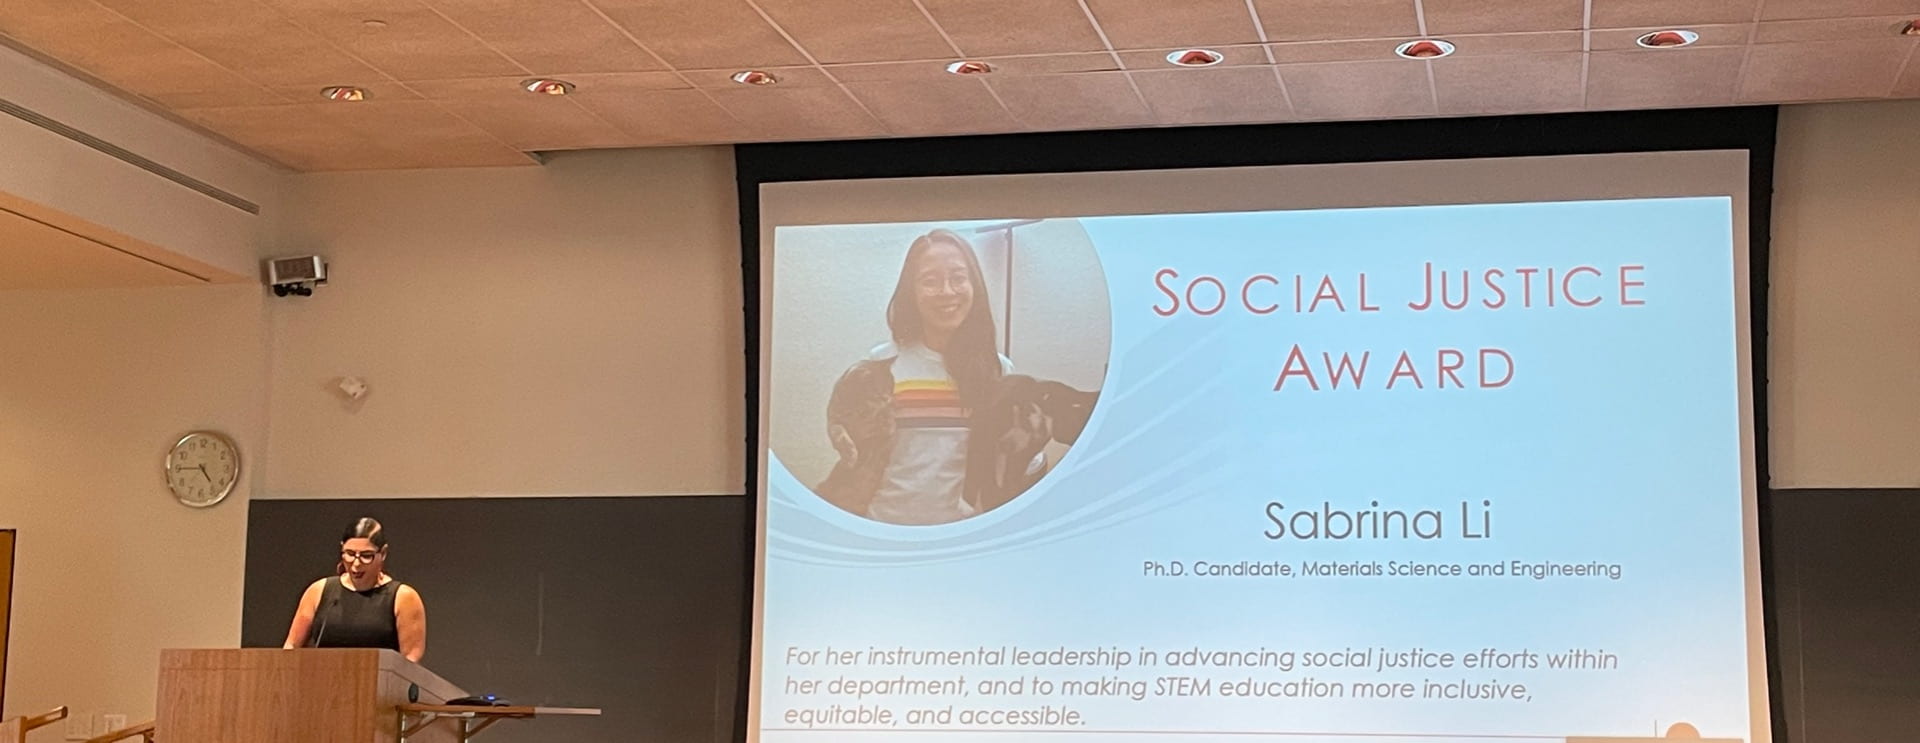 Associate Dean for Inclusion and Student Engagement Sara Xayarath Hernández presenting a Social Justice Award to Sabrina Li (PhD Candidate, Materials Science and Engineering) at the 2022 Graduate Diversity and Inclusion Awards & Recognition Celebration.